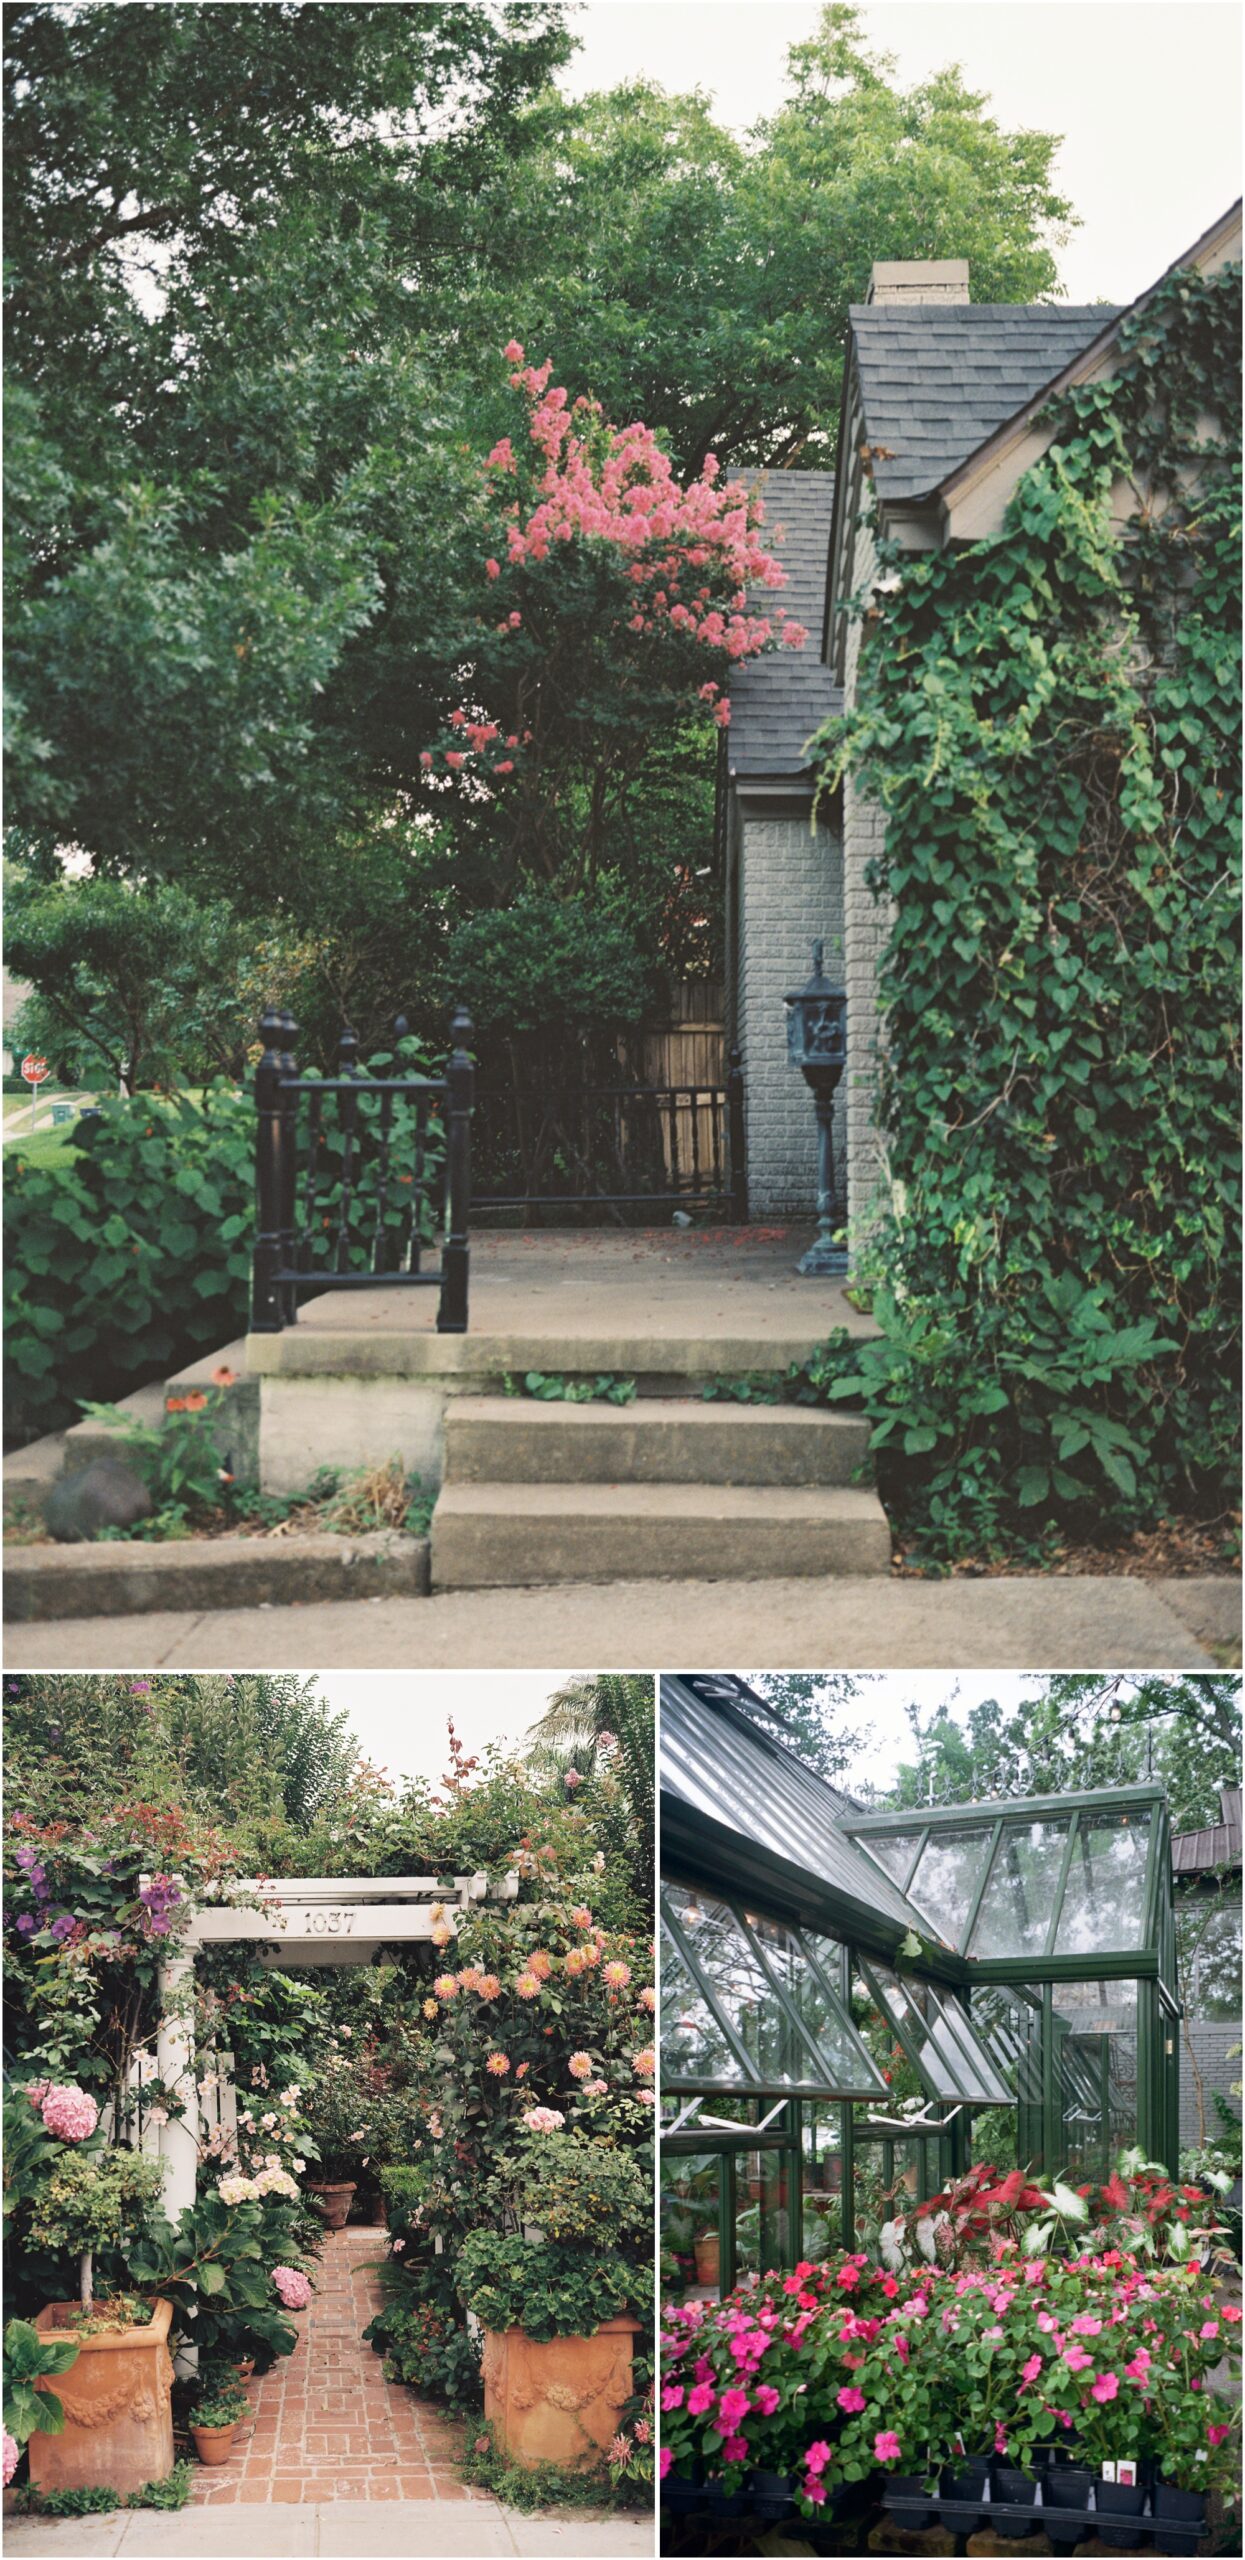 Home with pink flowers and greenery growing on the side on 120mm film